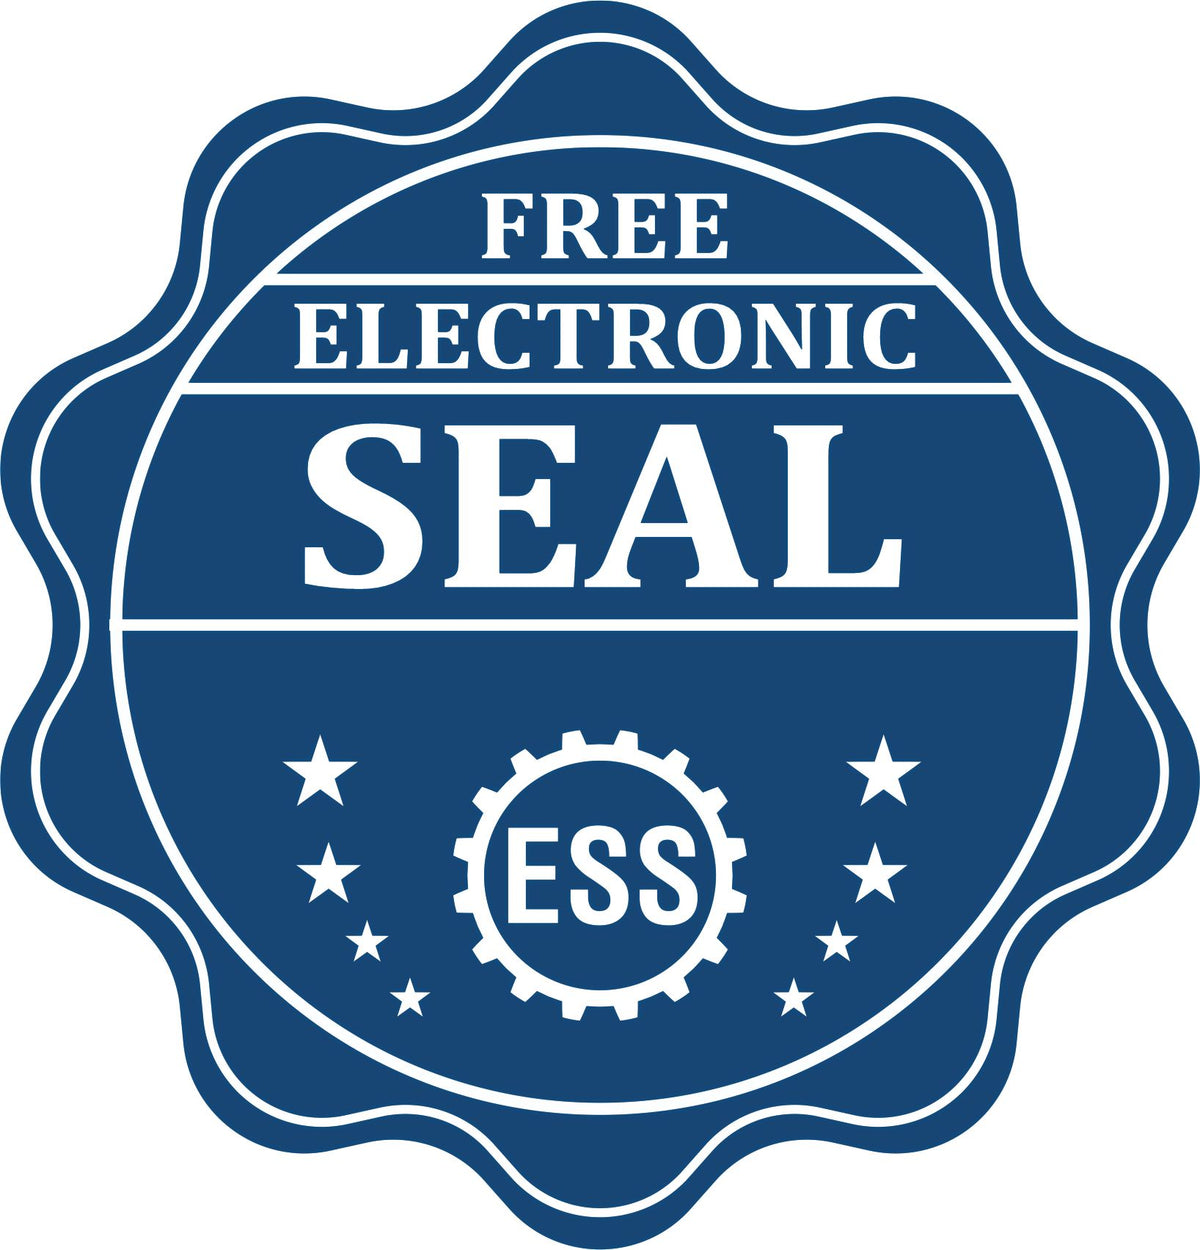 A badge showing a free electronic seal for the Hybrid Indiana Geologist Seal with stars and the ESS gear on the emblem.